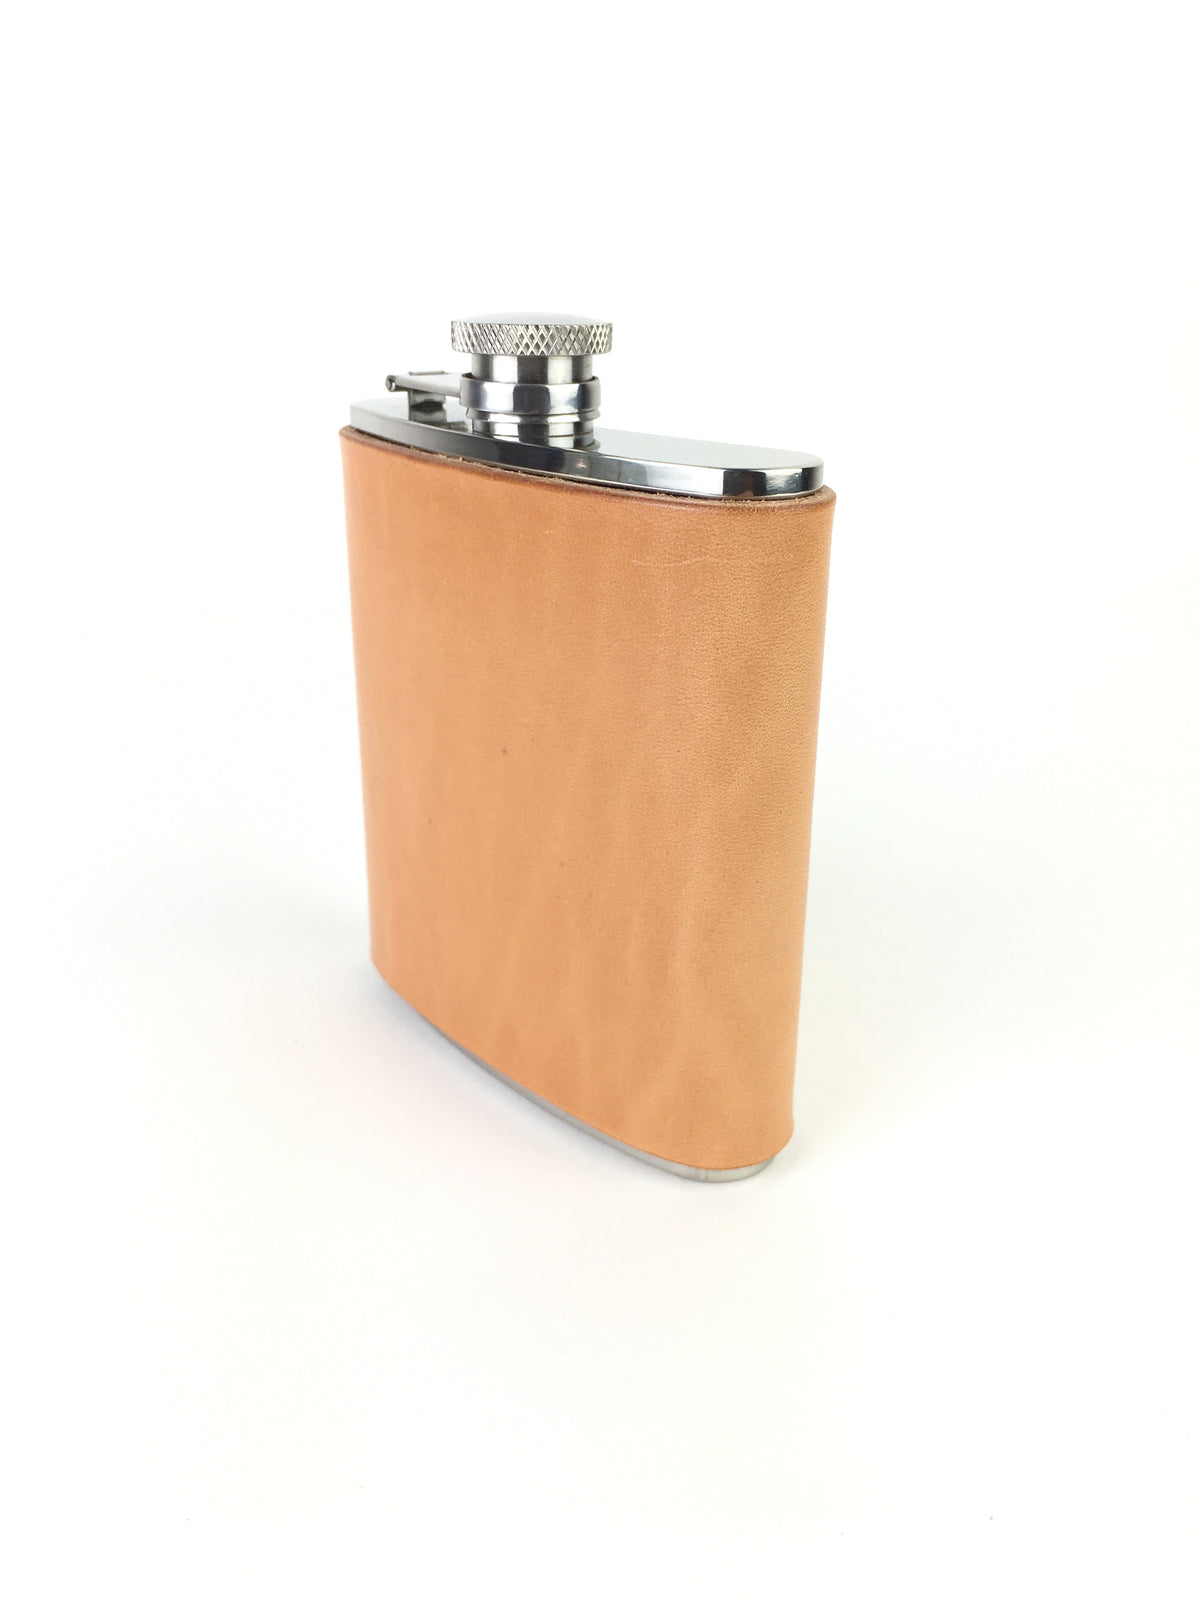 H+B WHISKY FLASK | RUSSET LEATHER